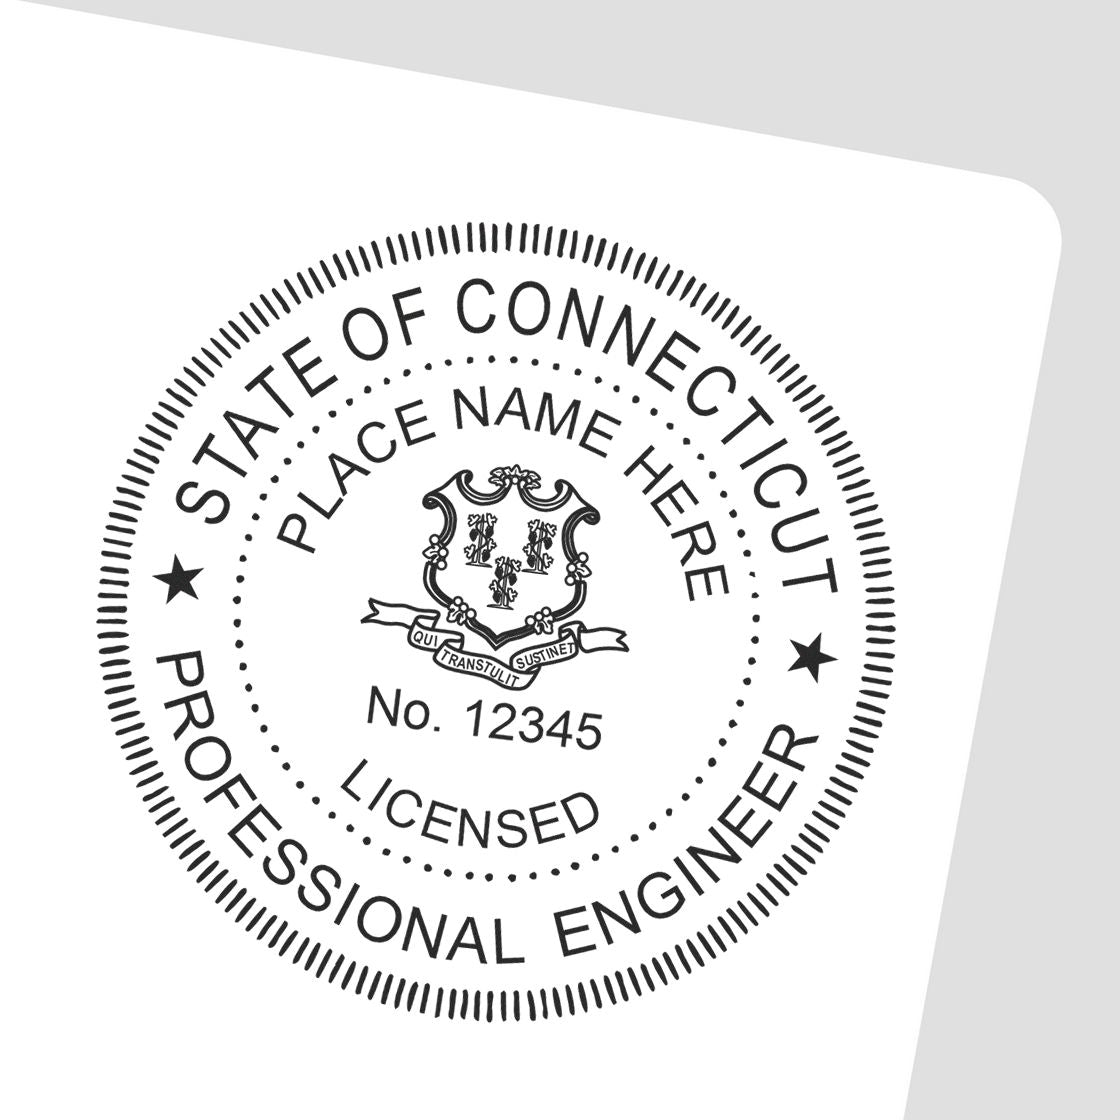 A stamped impression of the Digital Connecticut PE Stamp and Electronic Seal for Connecticut Engineer in this stylish lifestyle photo, setting the tone for a unique and personalized product.